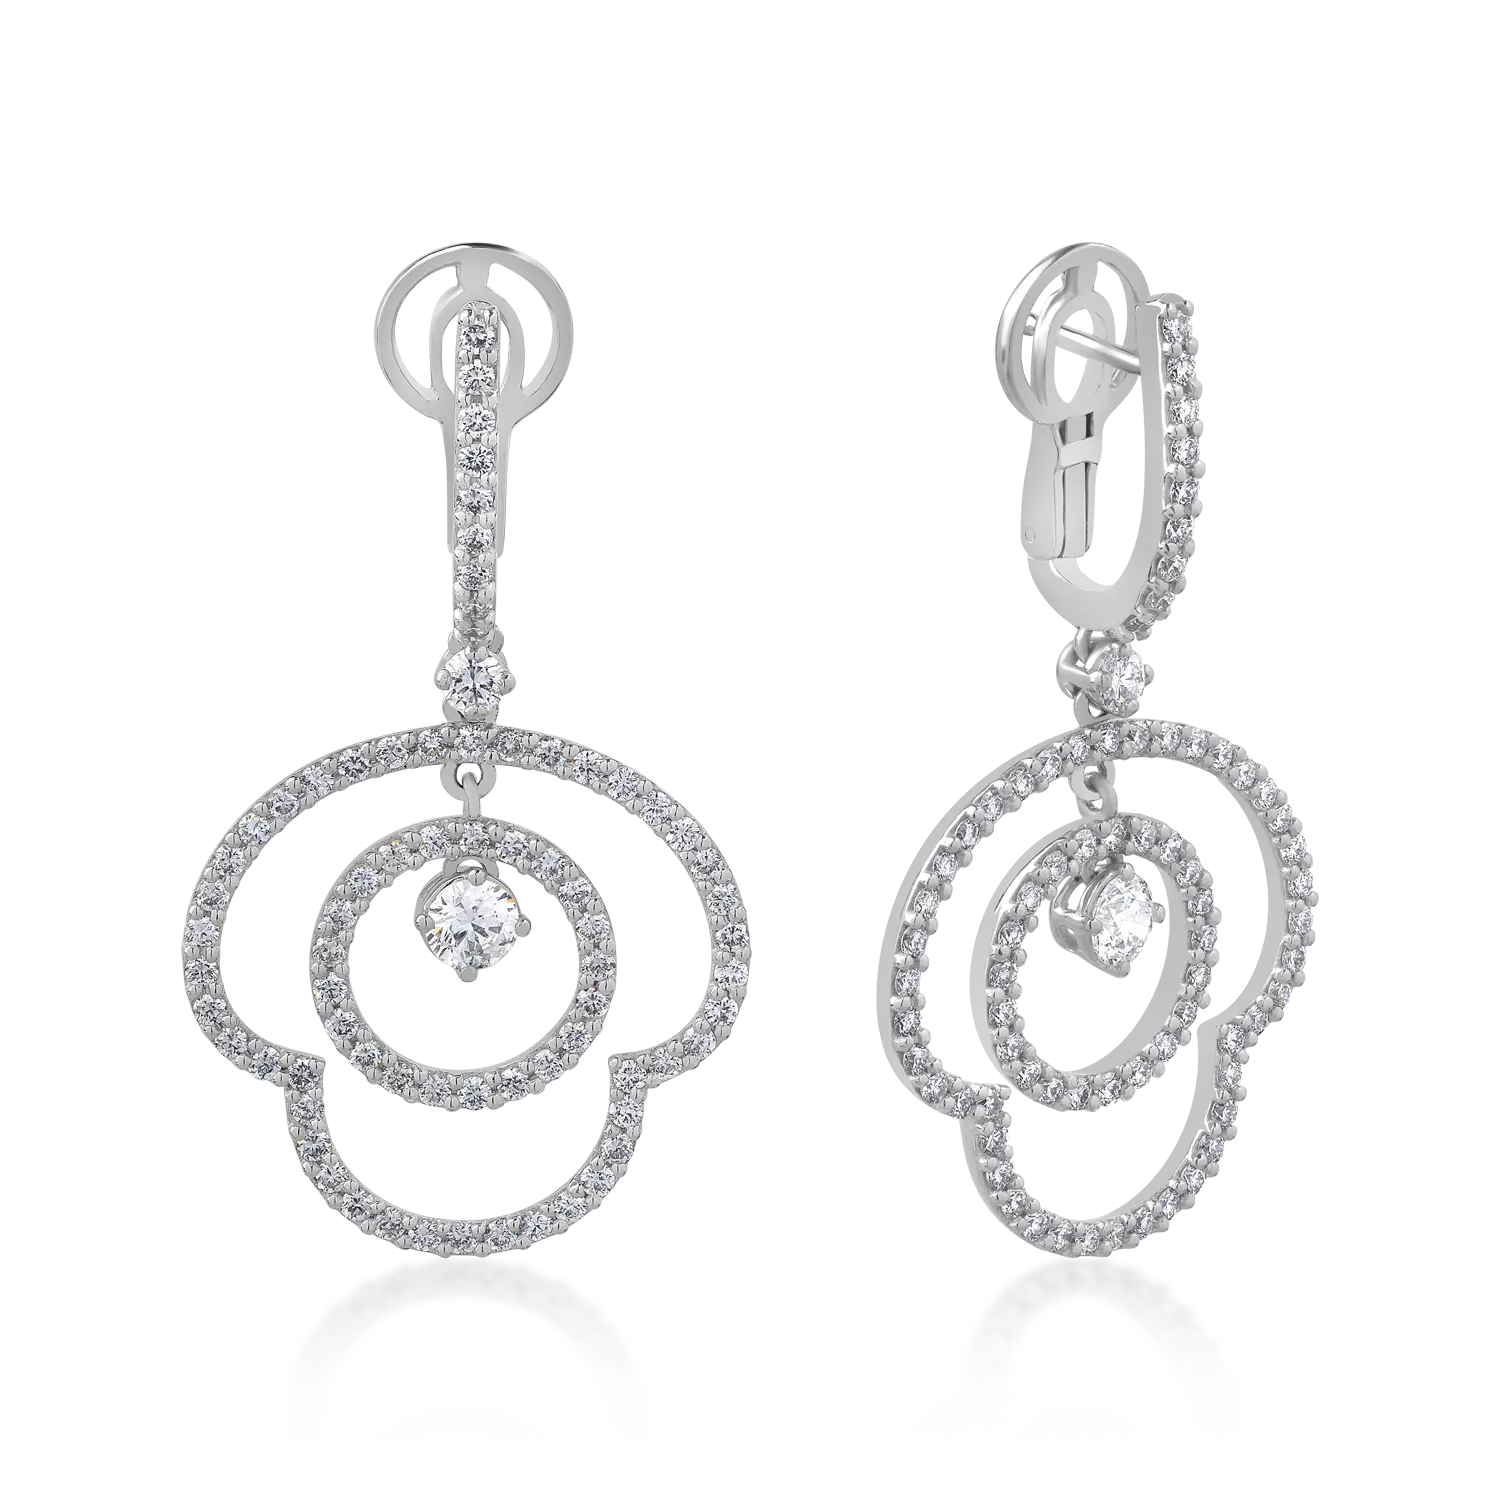 18K white gold earrings with 2.33ct diamonds